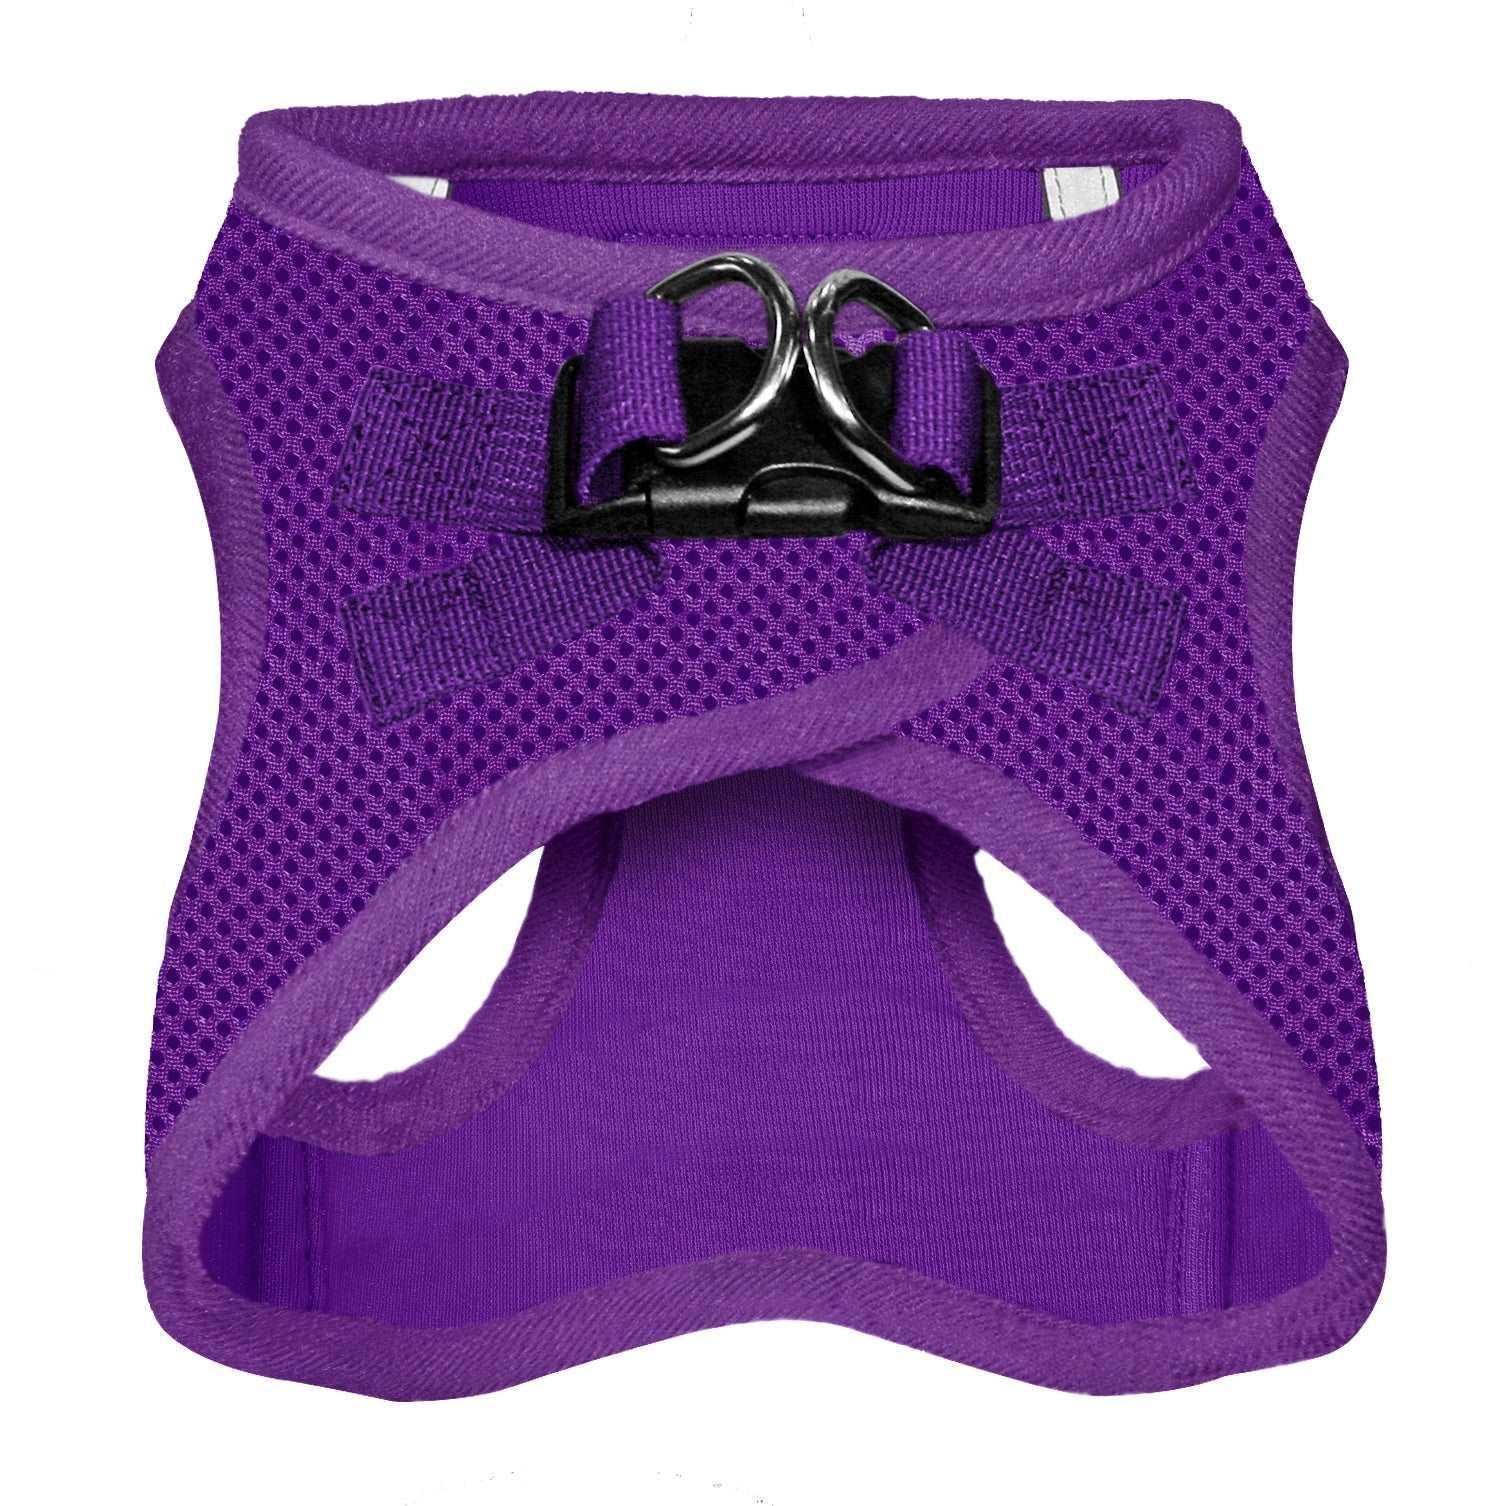 VOYAGER Step-In Air Pet Harness in Purple with Matching Trim and Webbing - Black